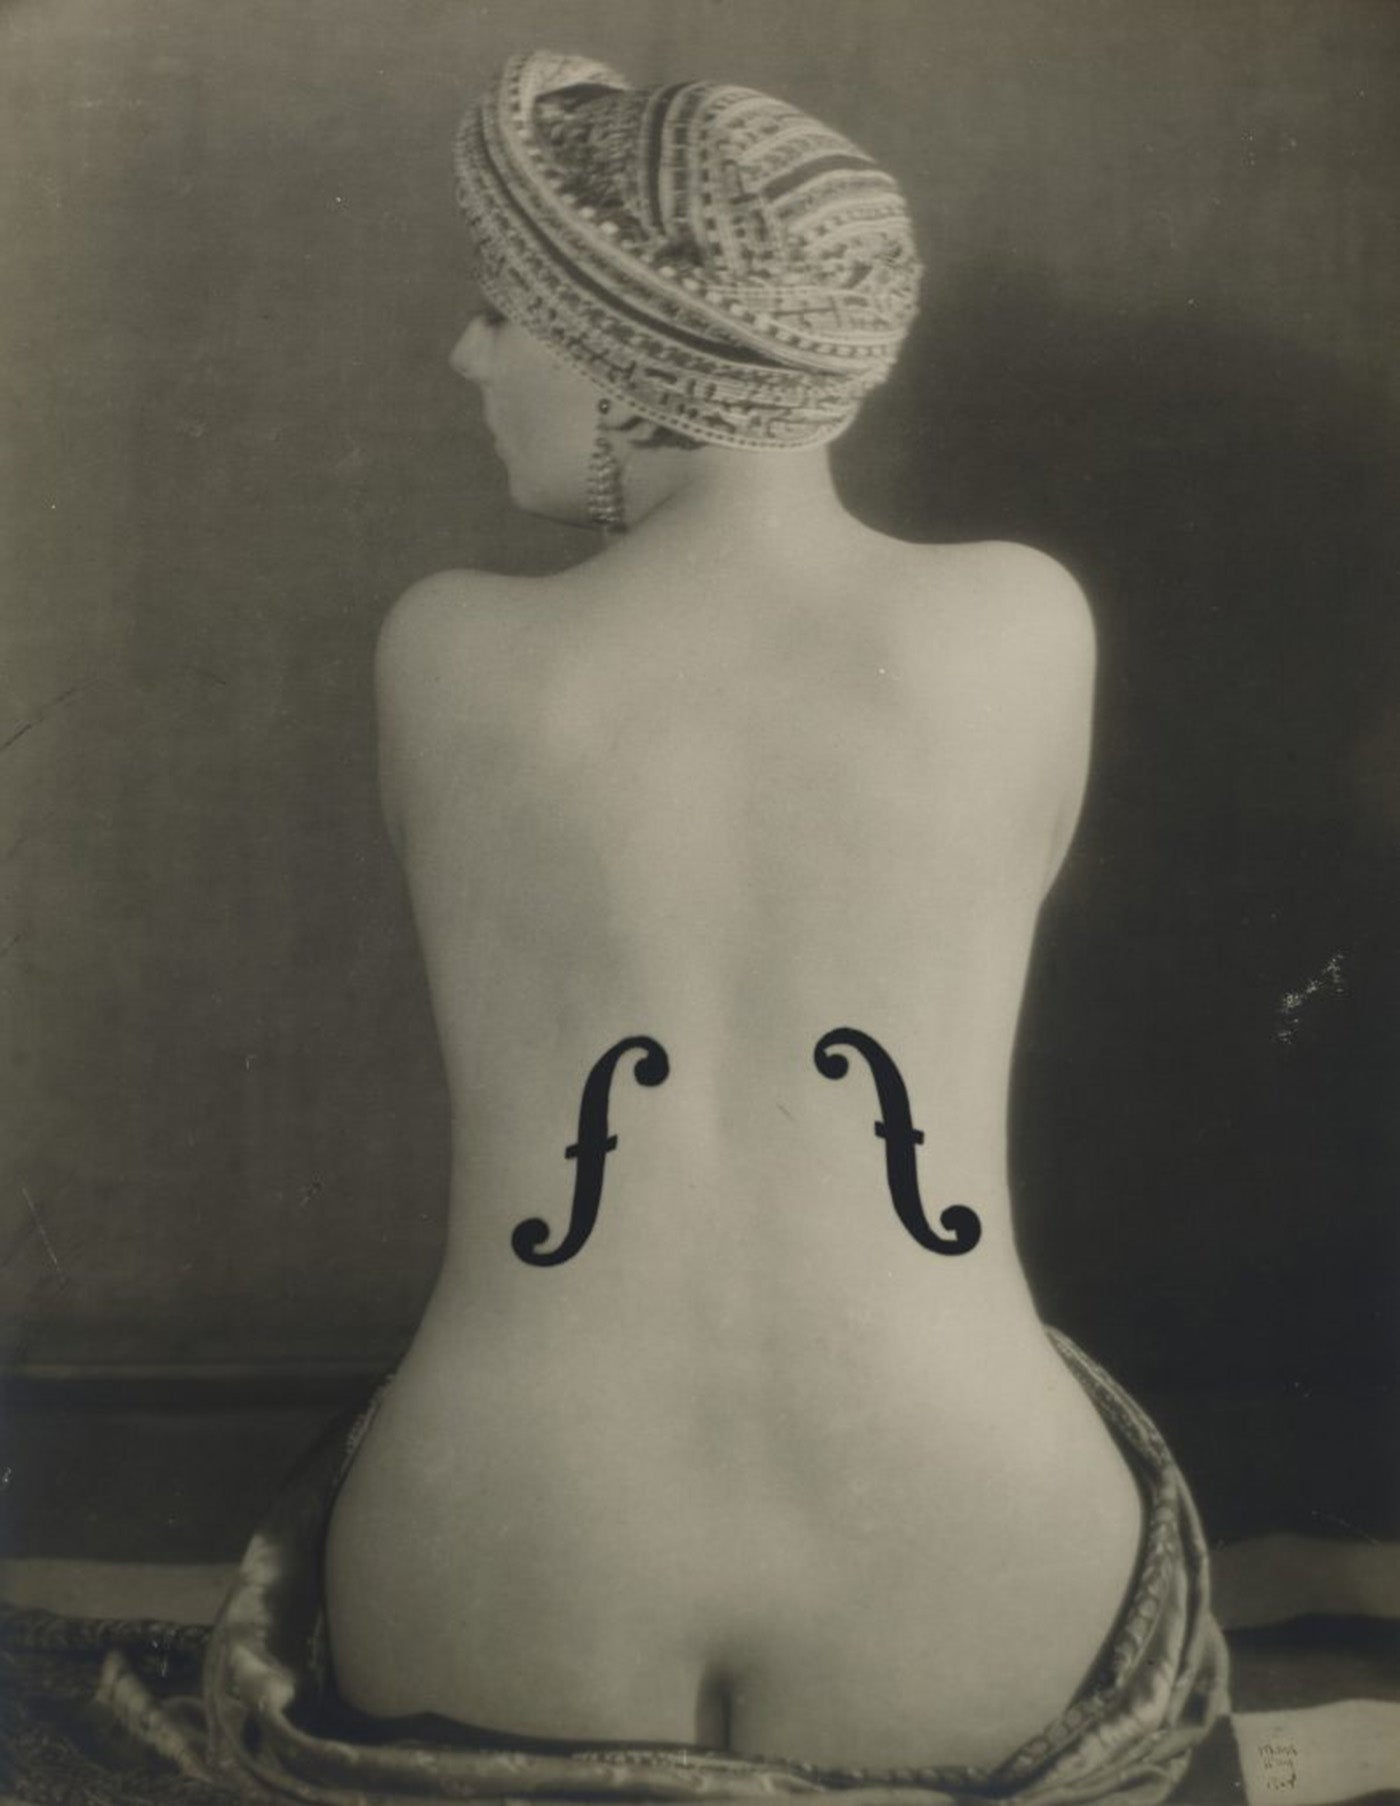 Man Ray's photograph, "Le Violon d'Ingres," sold for the record-breaking price of $12.4 million